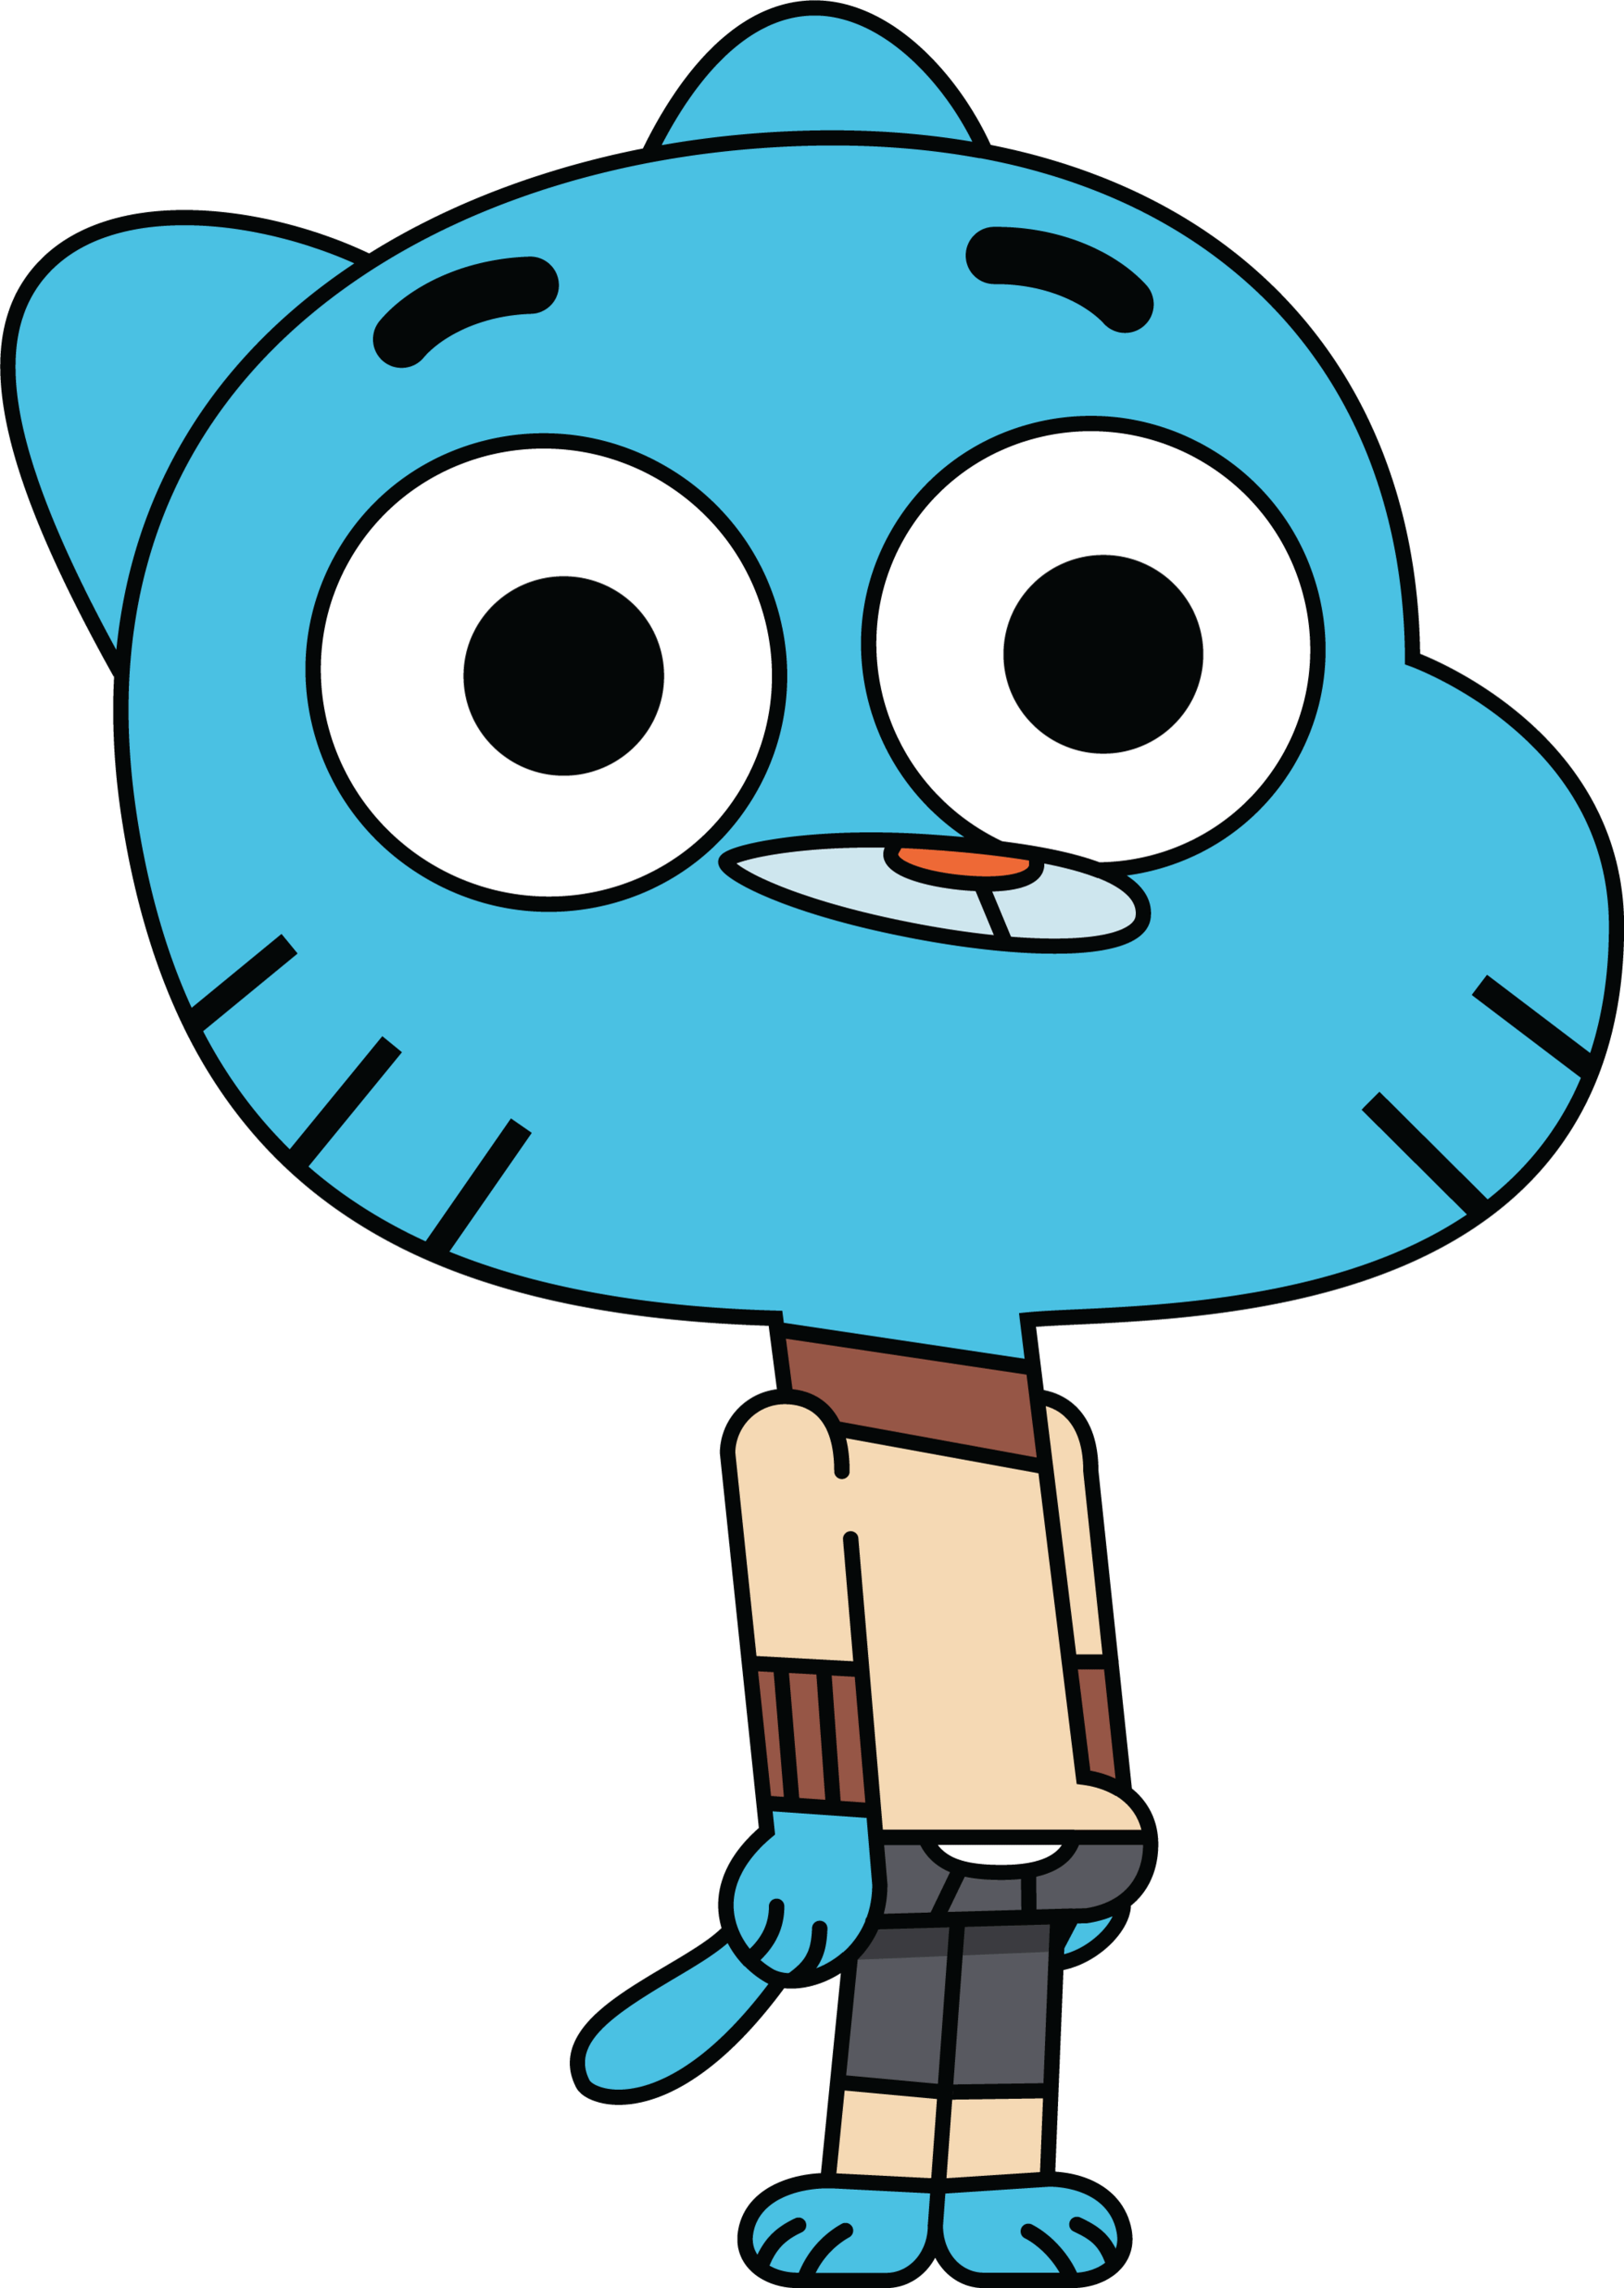 Gumball Watterson. The Amazing World of Gumball